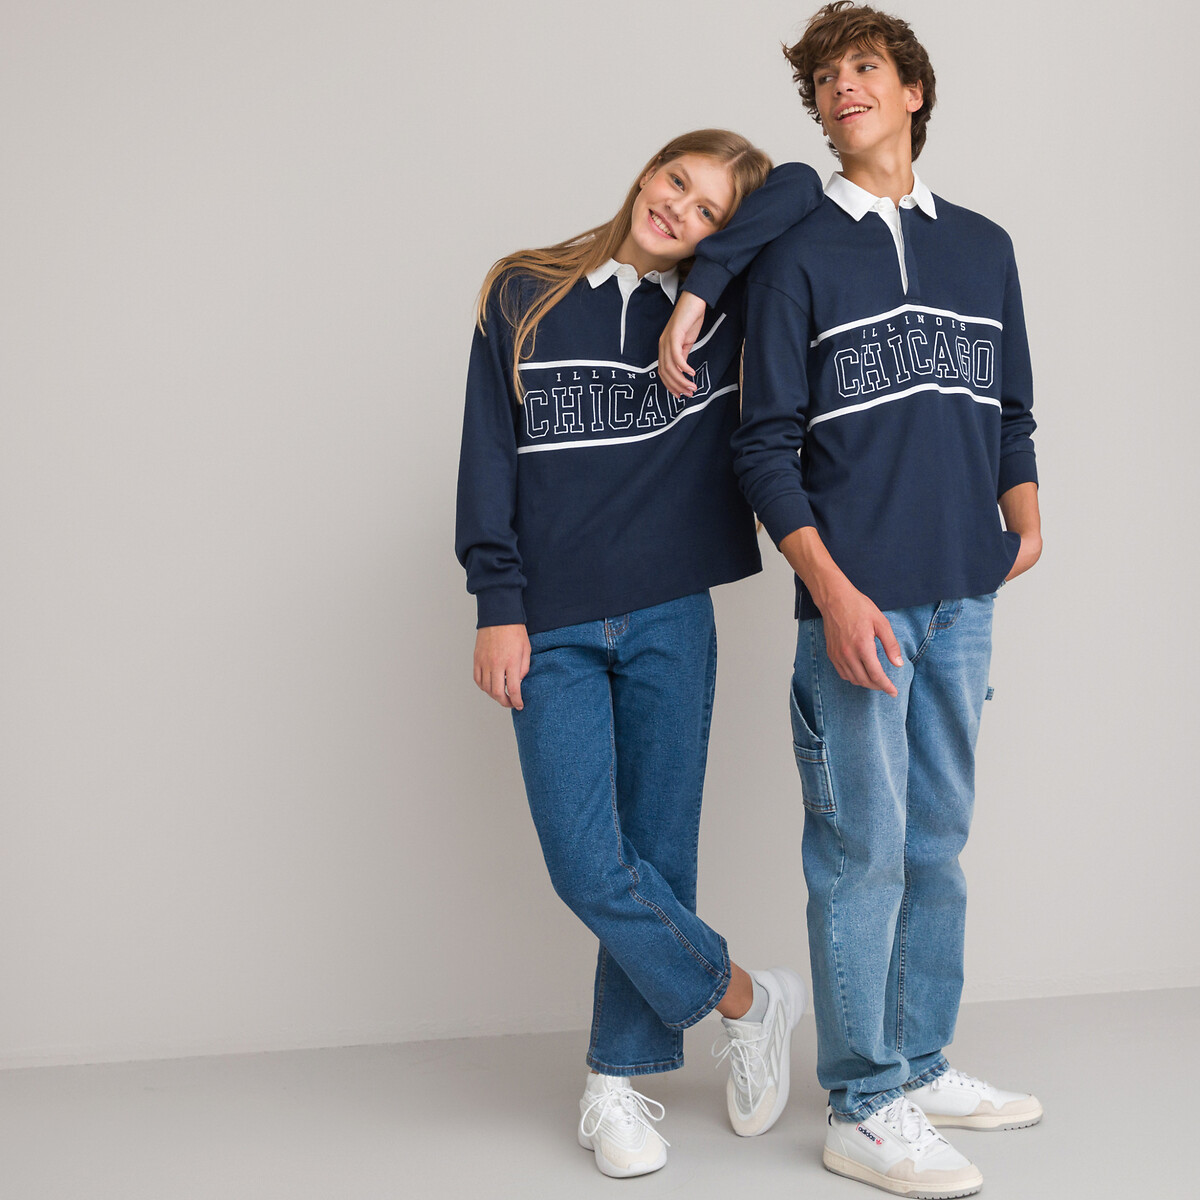 Unisex Oversized Rugby Shirt in Cotton with Long Sleeves